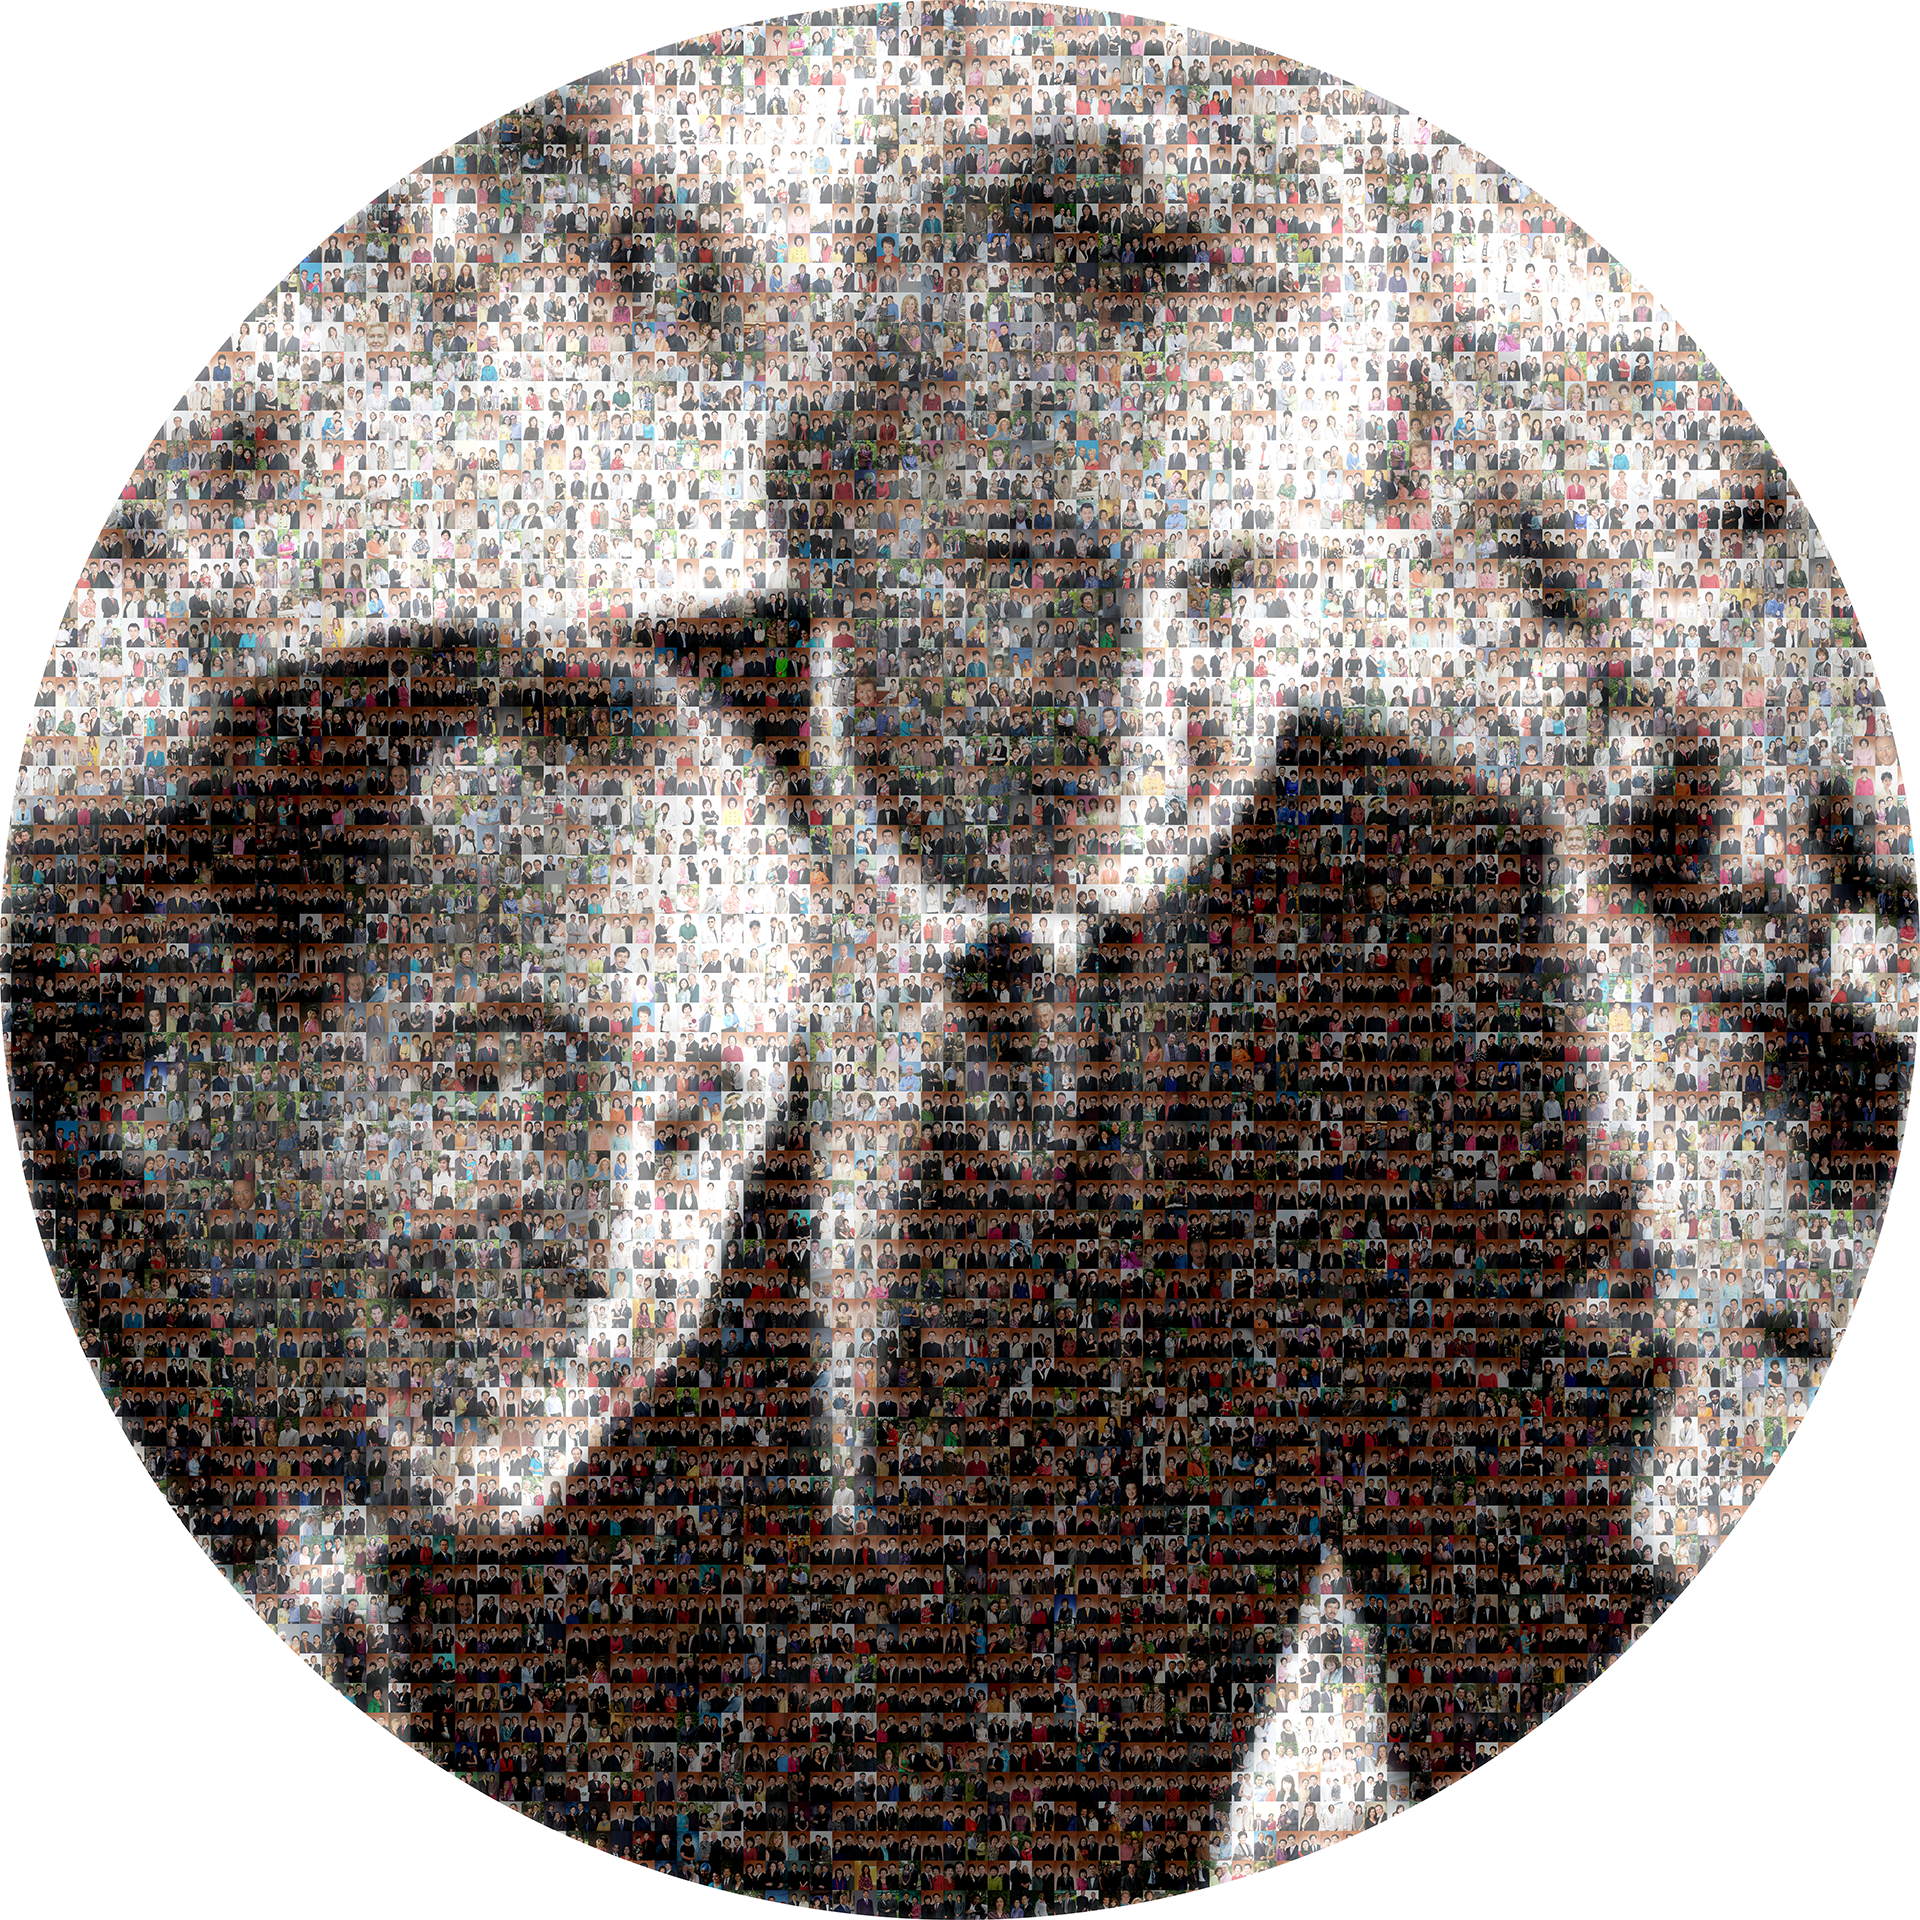 photo mosaic created using 1940 corporate worker selected photos